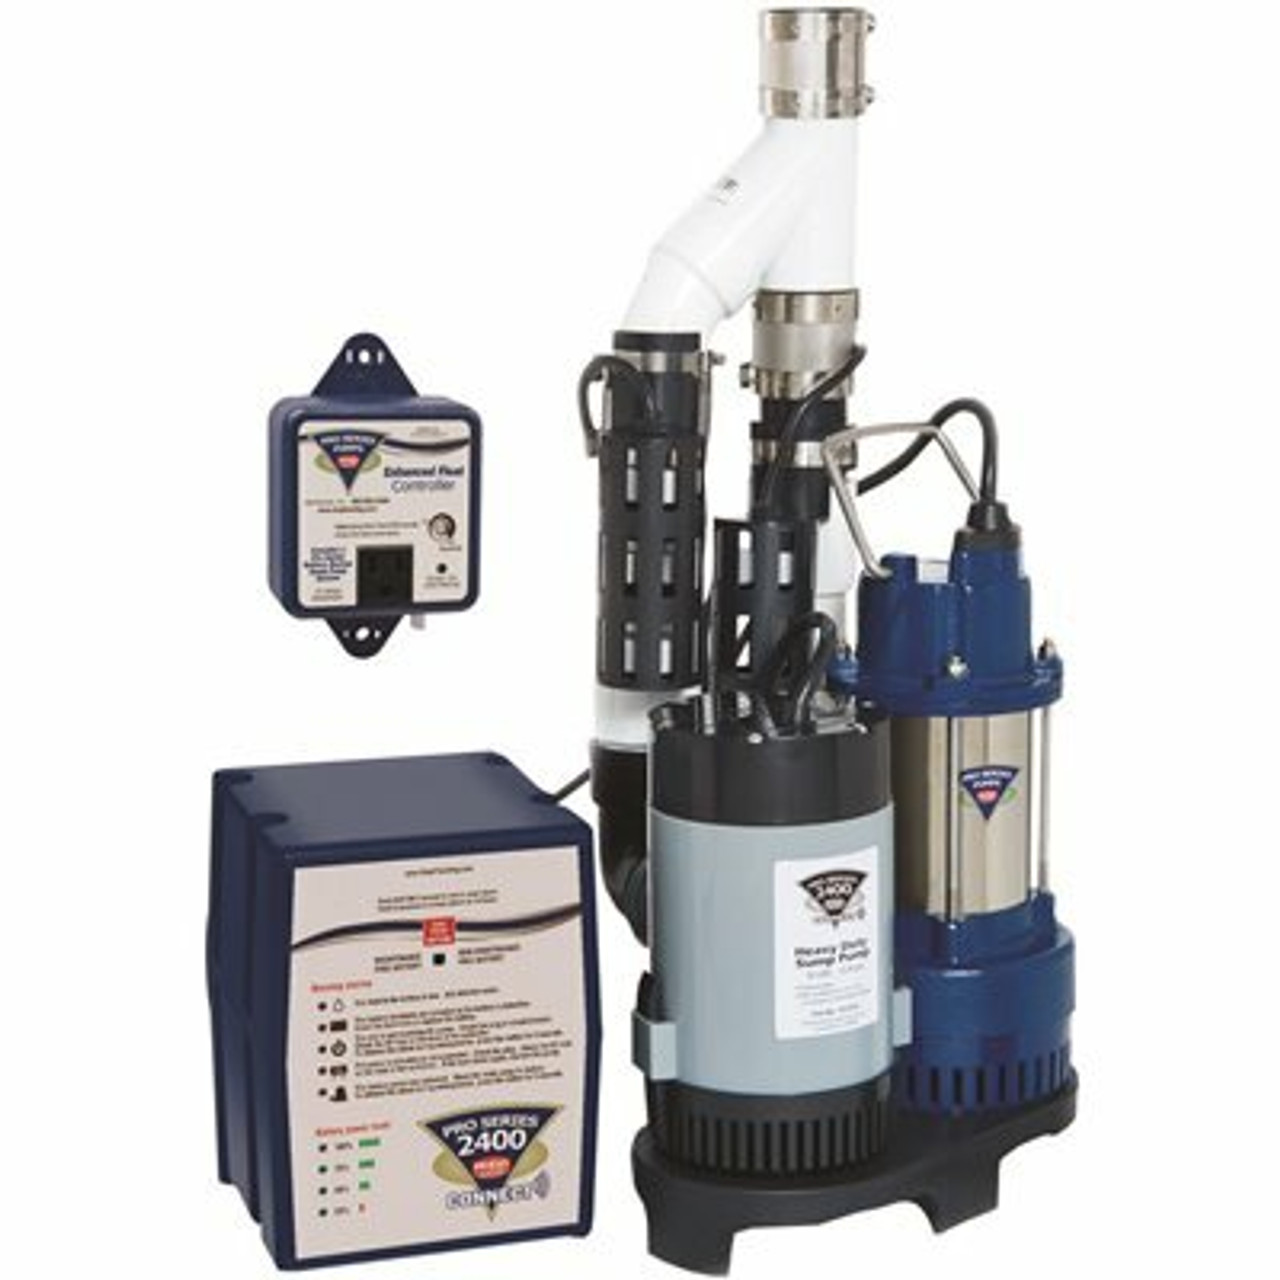 Pro Series Pumps 1/3 Hp Primary And Phcc-2400 Battery Backup Sump Pump System